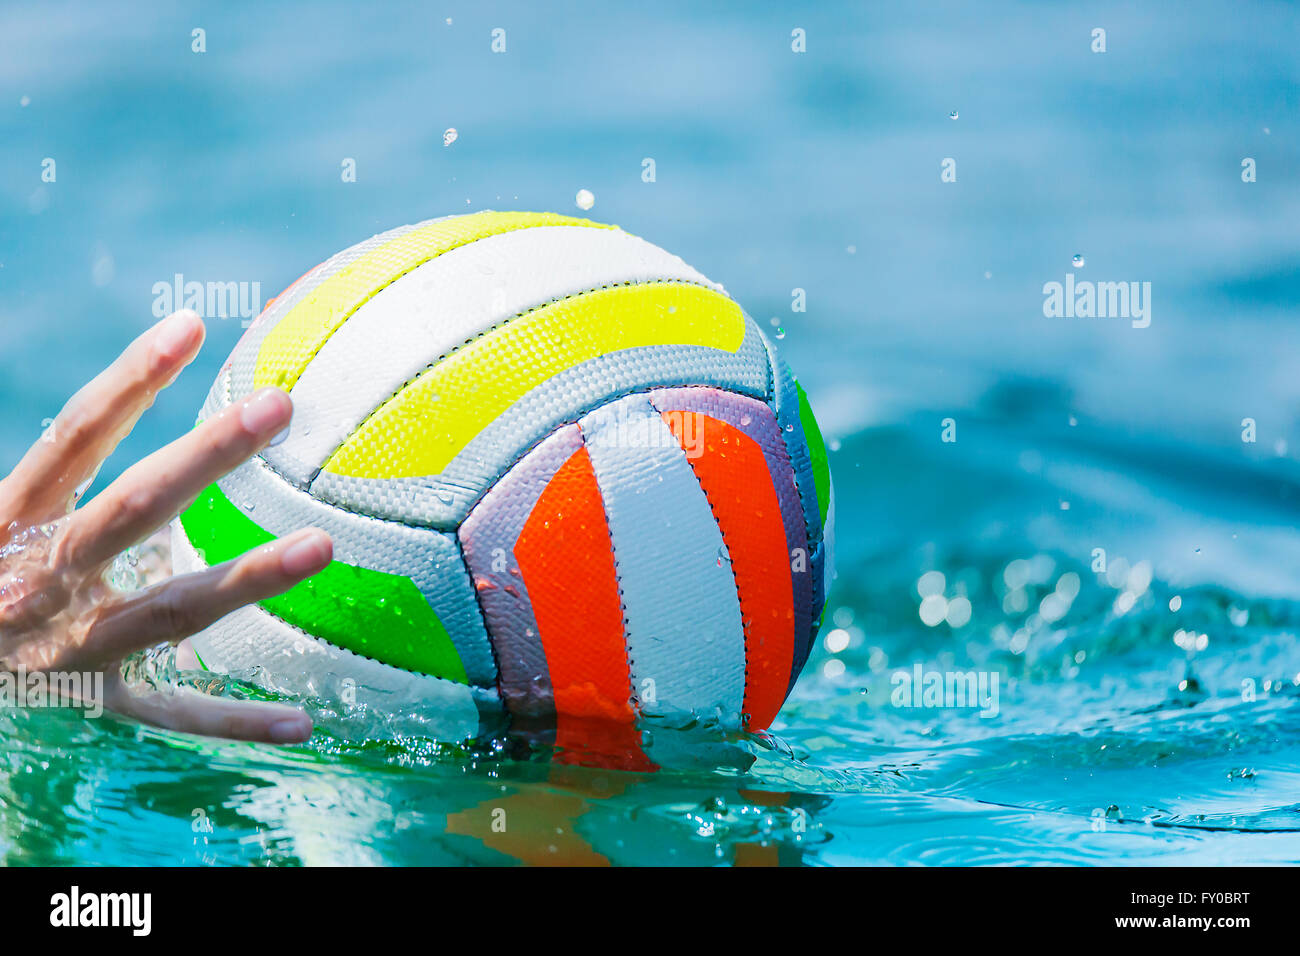 A hand of a swimmer reaches for a beach ball in the water Stock Photo